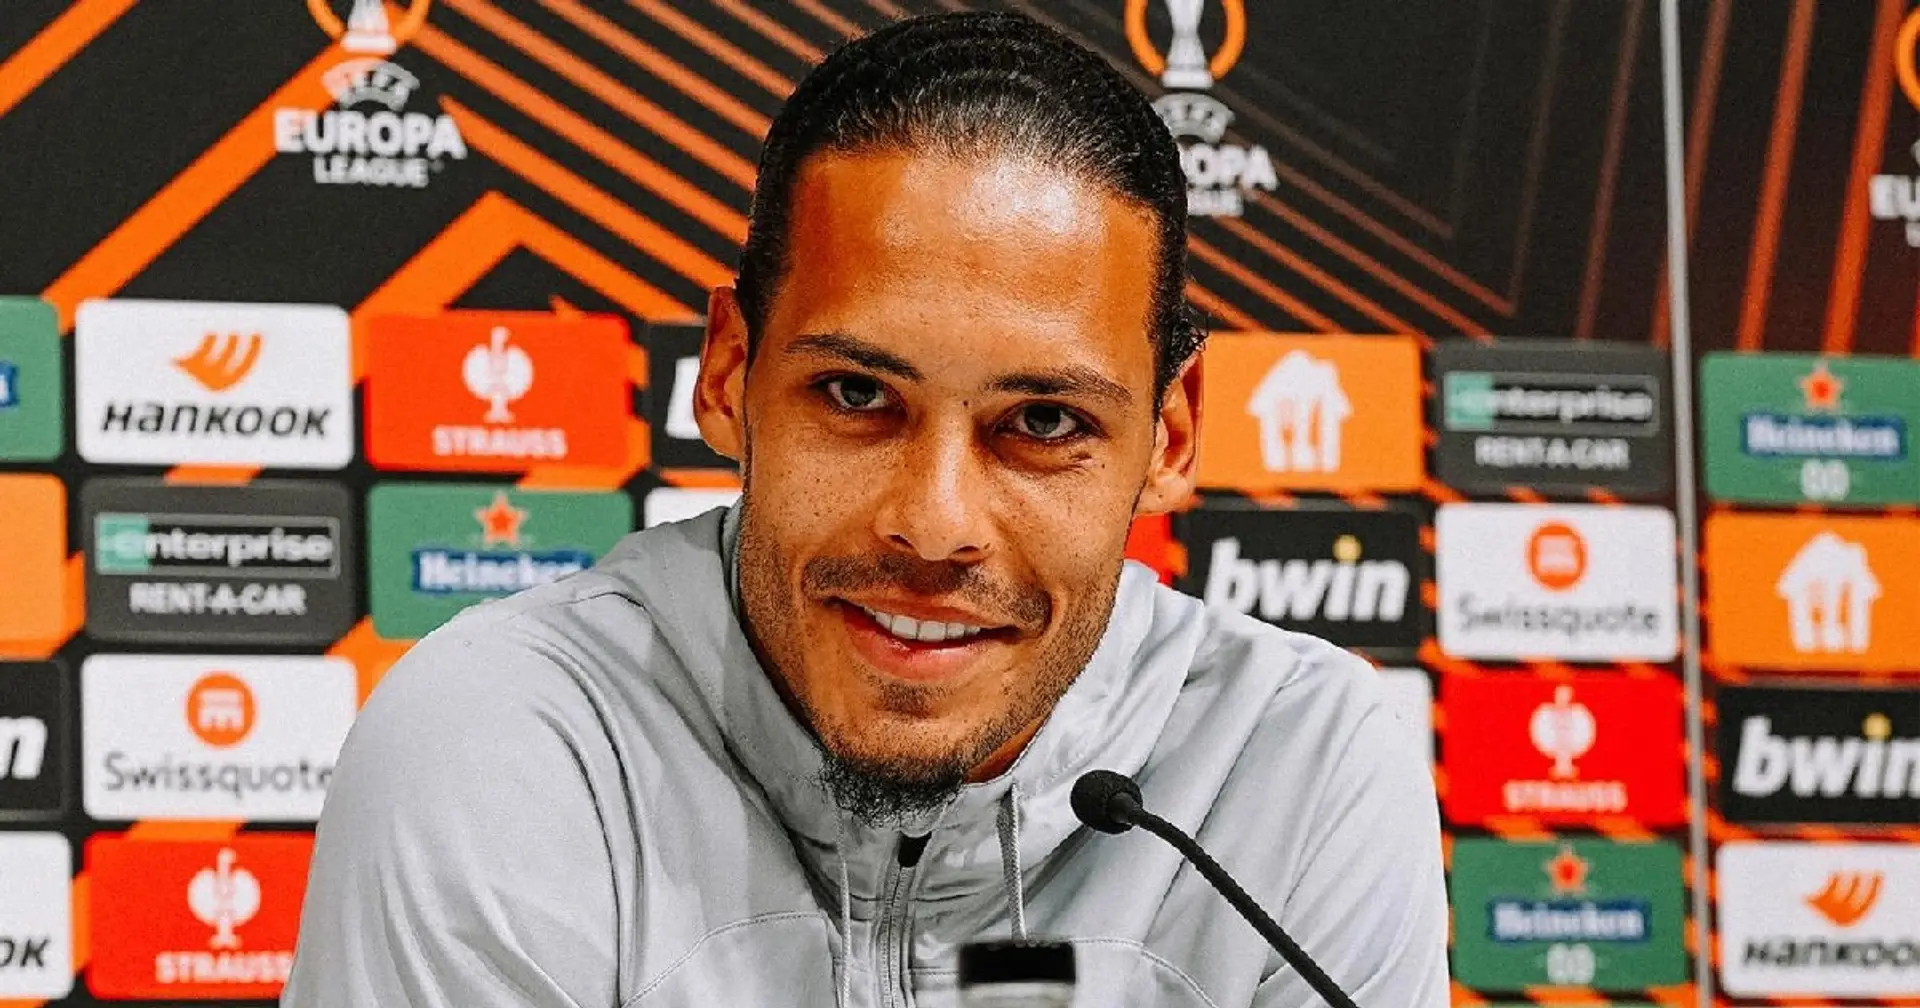 'Twists and turns can happen': Van Dijk on whether Liverpool are favourites to win Europa League